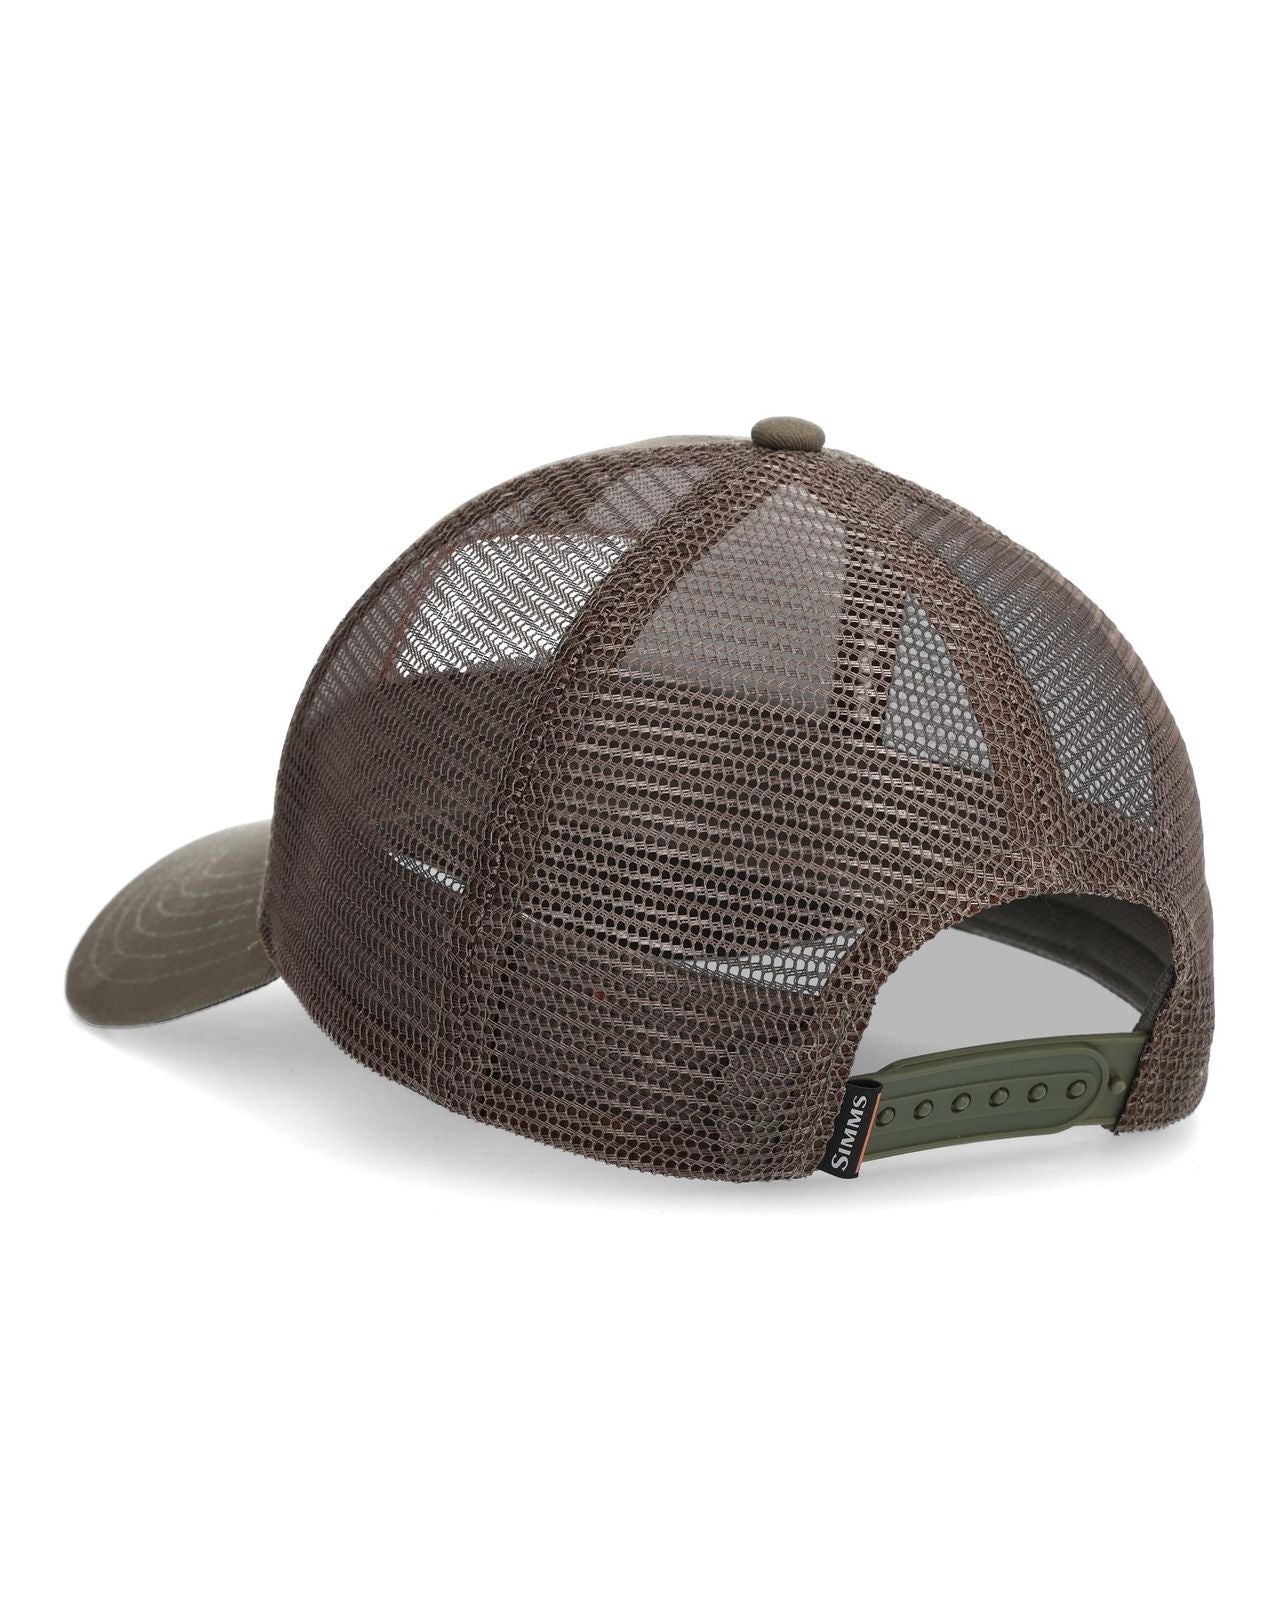 SIMMS TROUT ICON TRUCKER CAP HICKORY